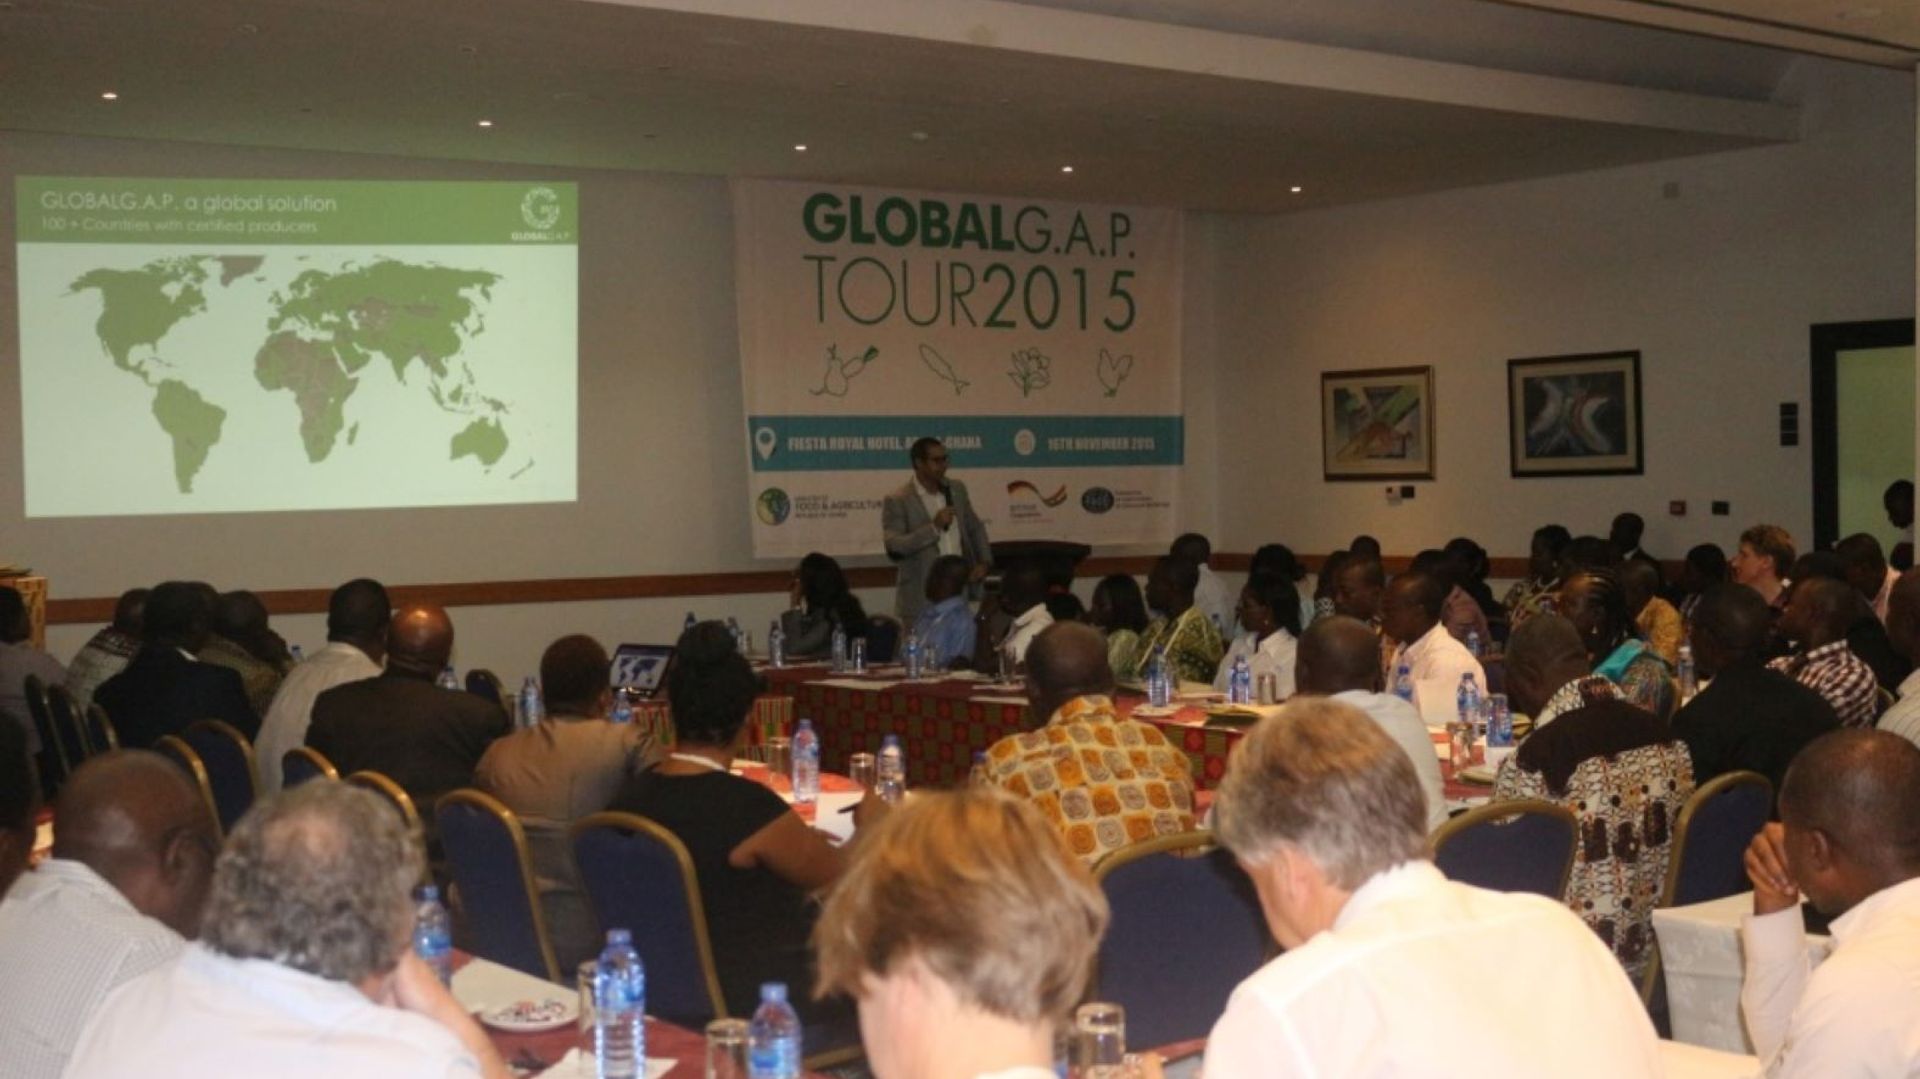 Image of the 2015 GLOBALG.A.P. TOUR stop in Spain